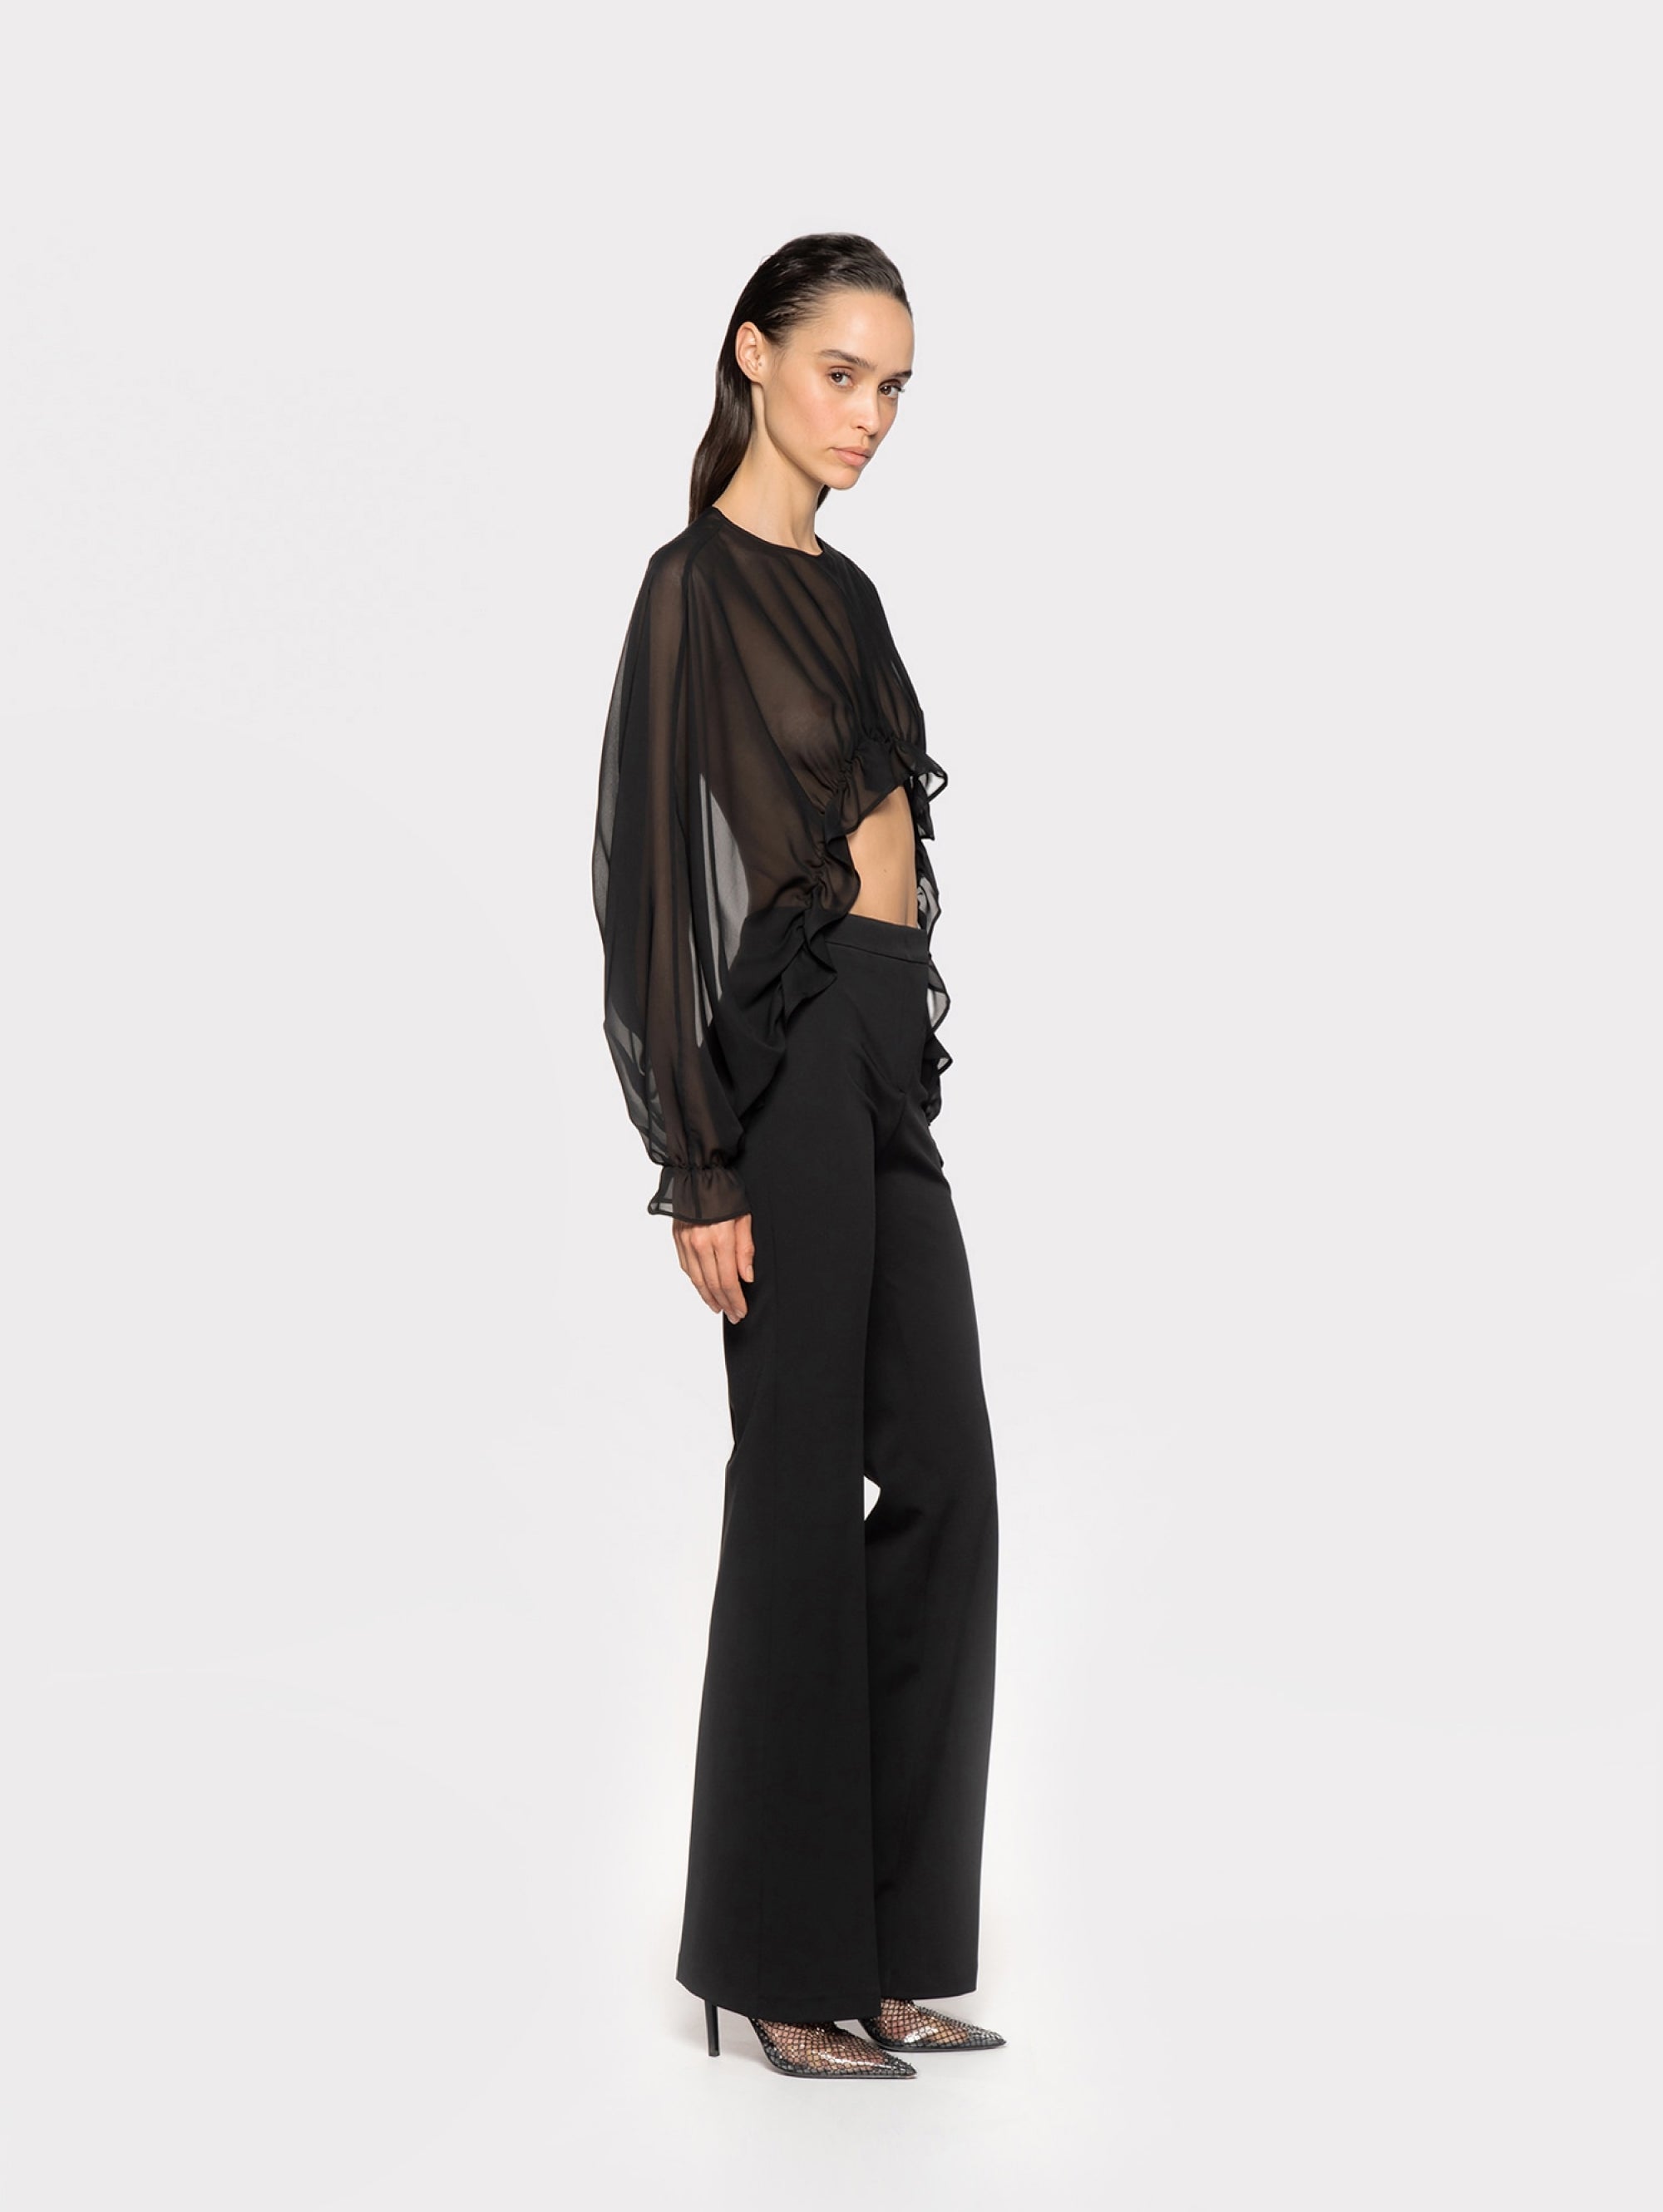 Flare Pants in Black Technical Fabric